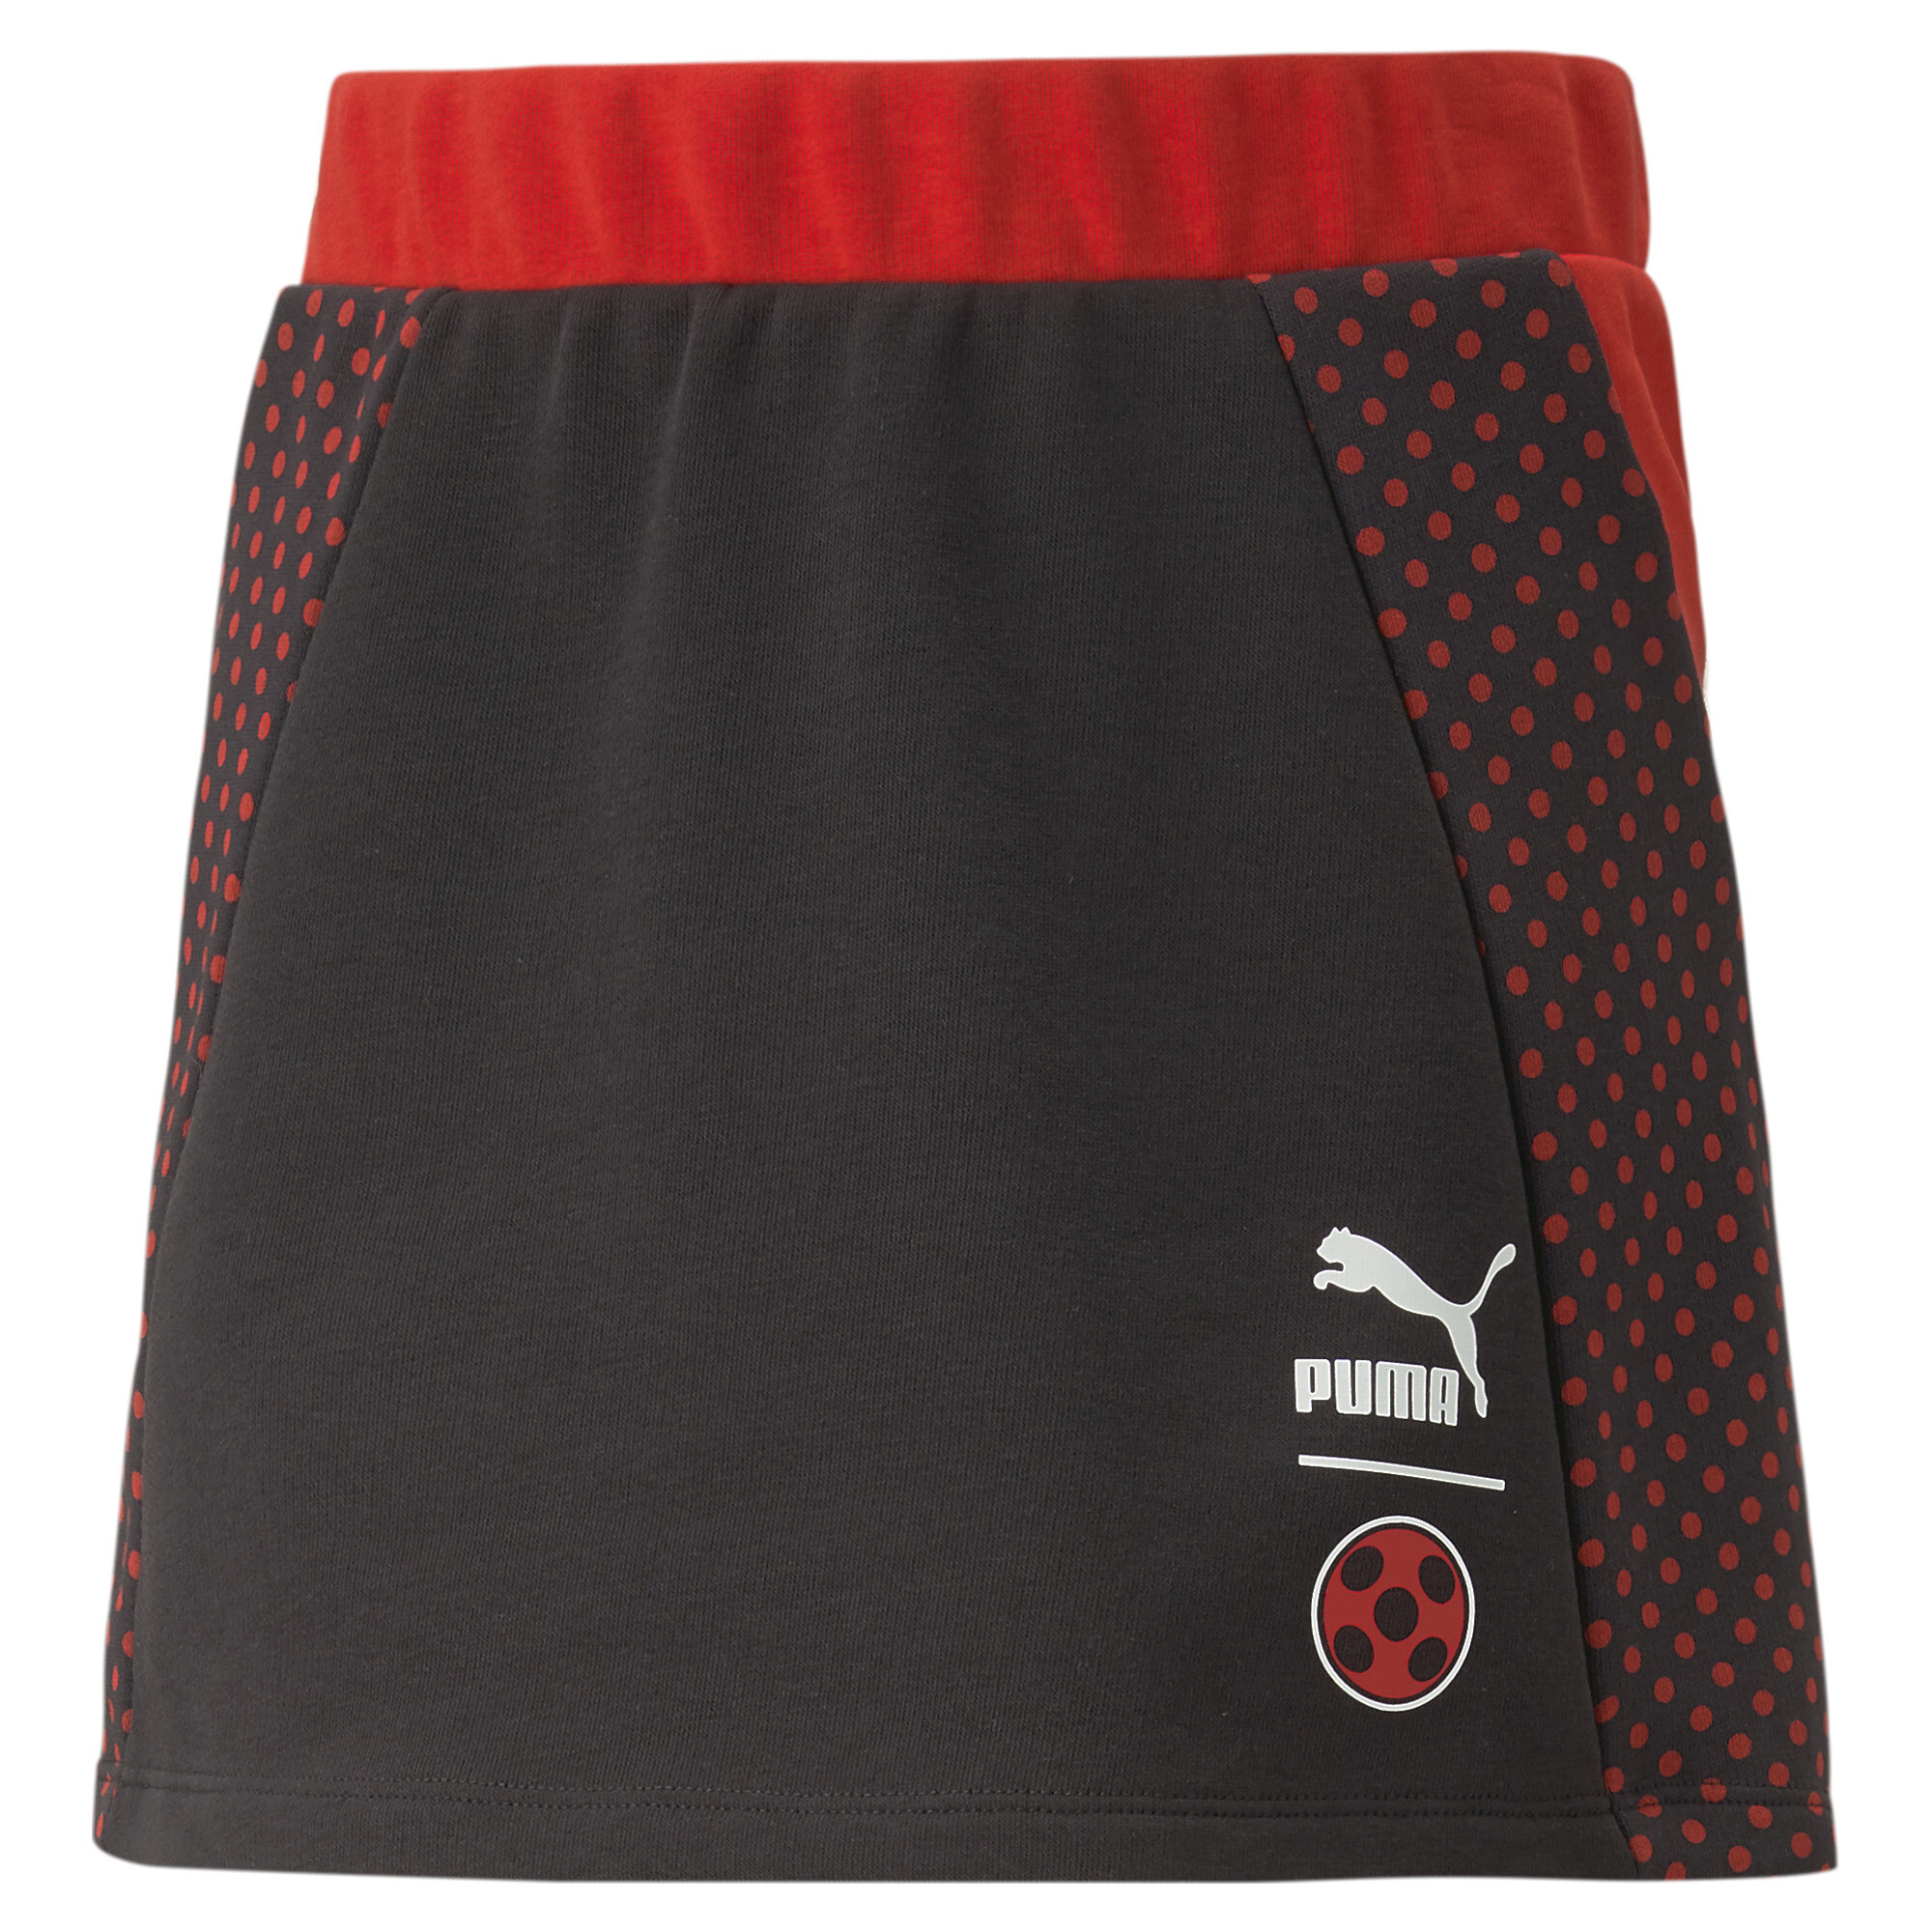 PUMA X MIRACULOUS Skirt In Black, Size 13-14 Youth